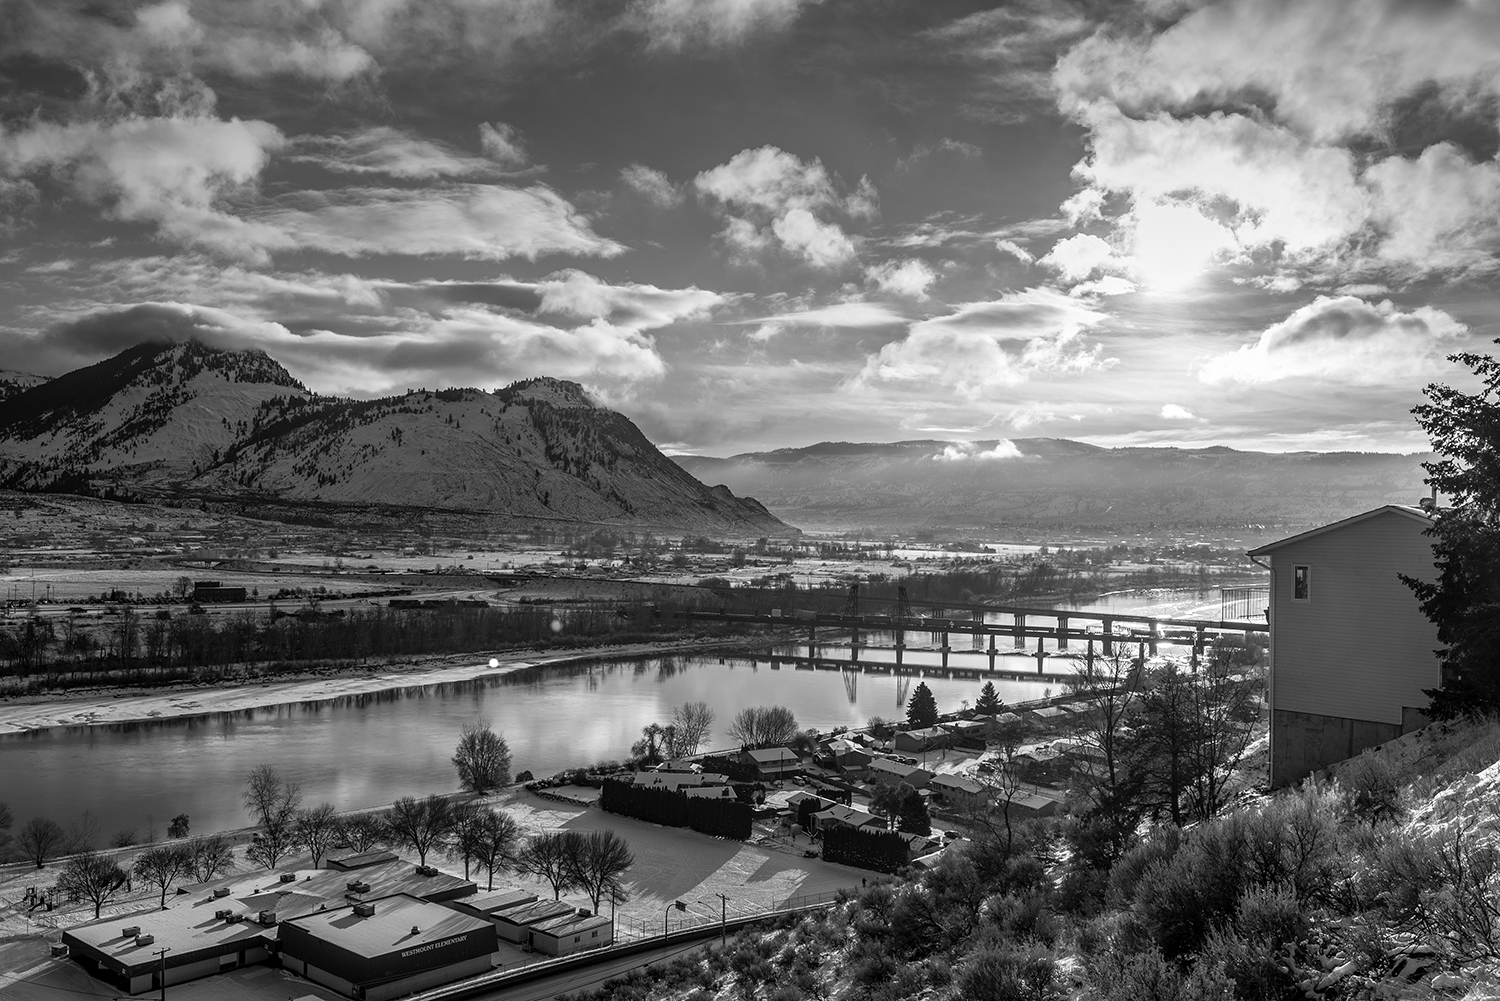 Kamloops grayscale photo of clouds and city with lake